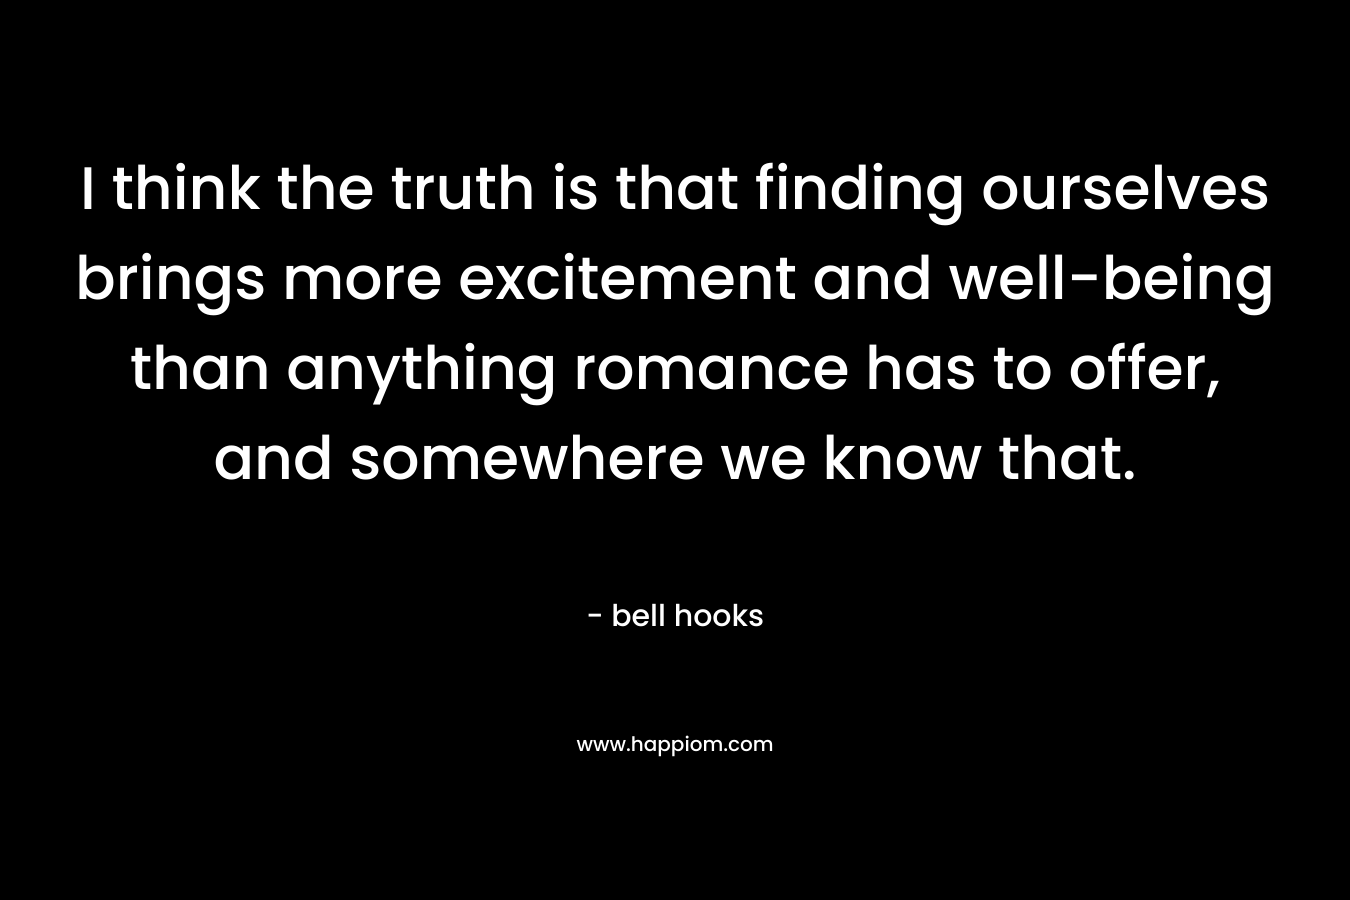 I think the truth is that finding ourselves brings more excitement and well-being than anything romance has to offer, and somewhere we know that.